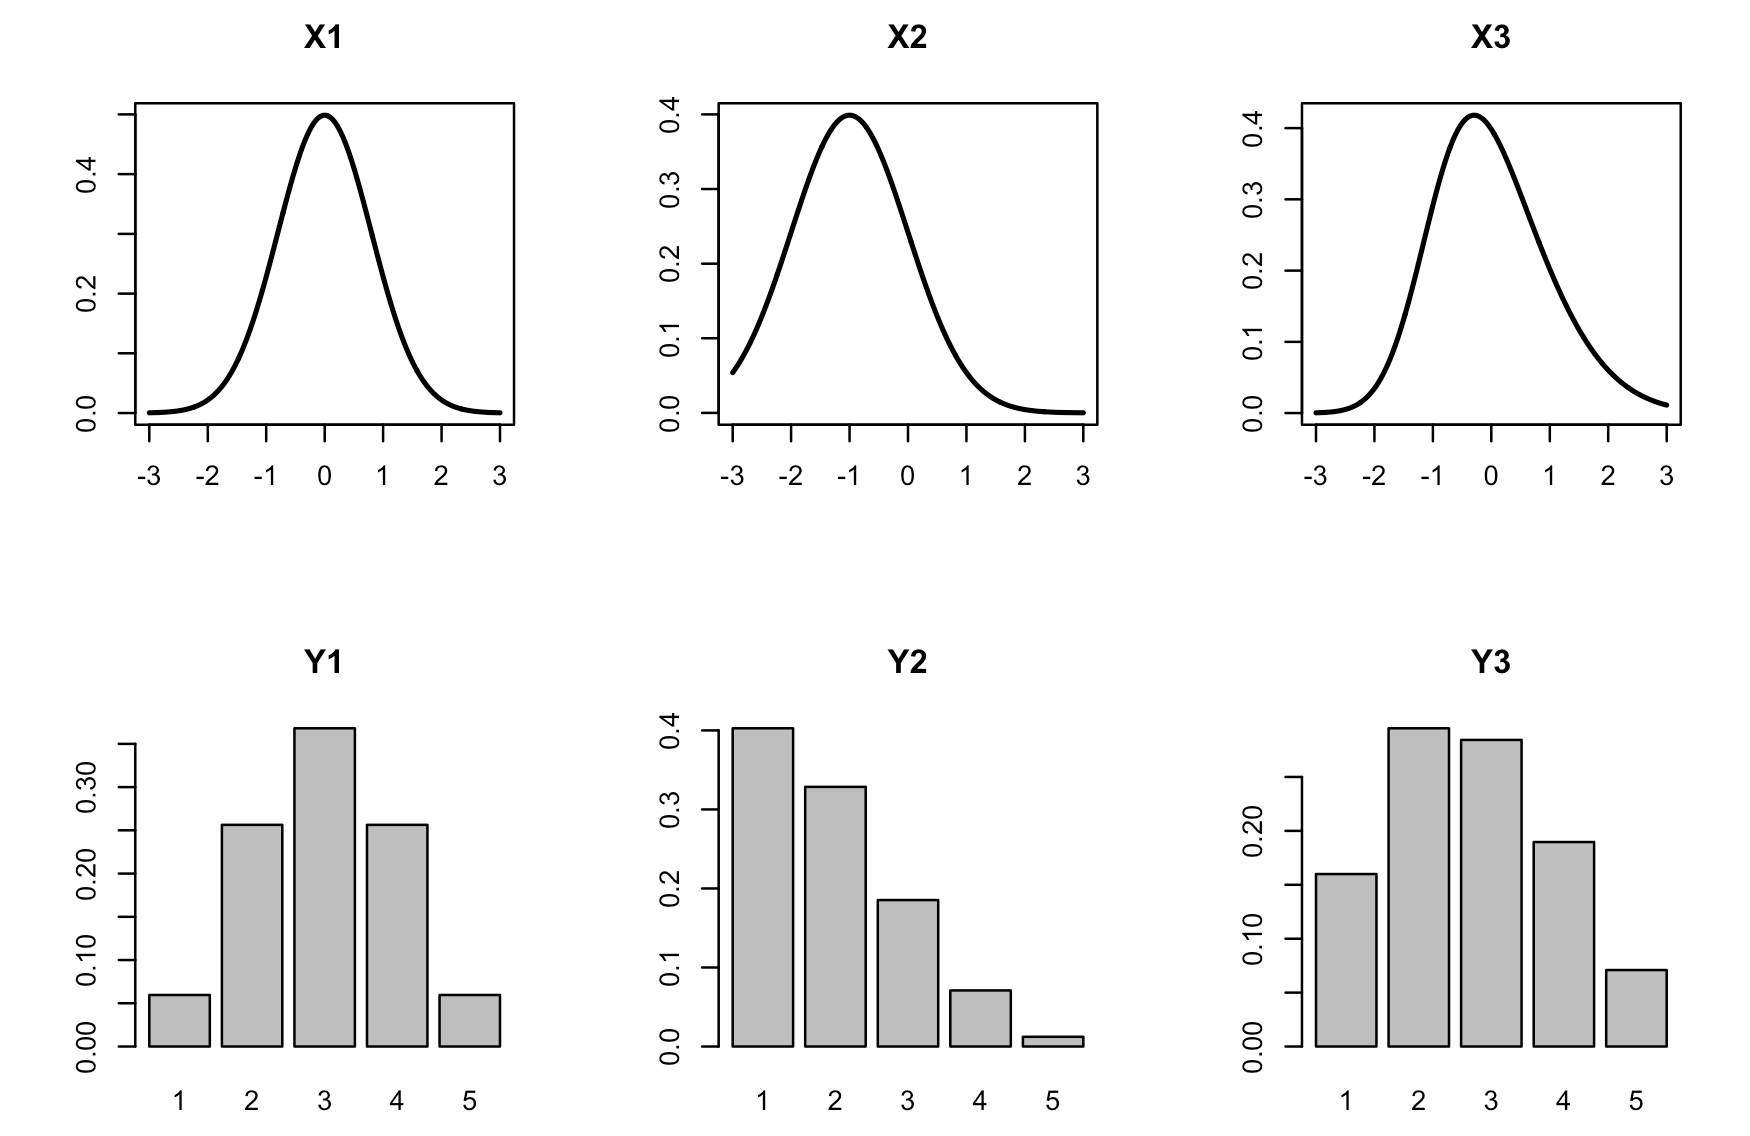 Transformation of latent variables to Likert response variables